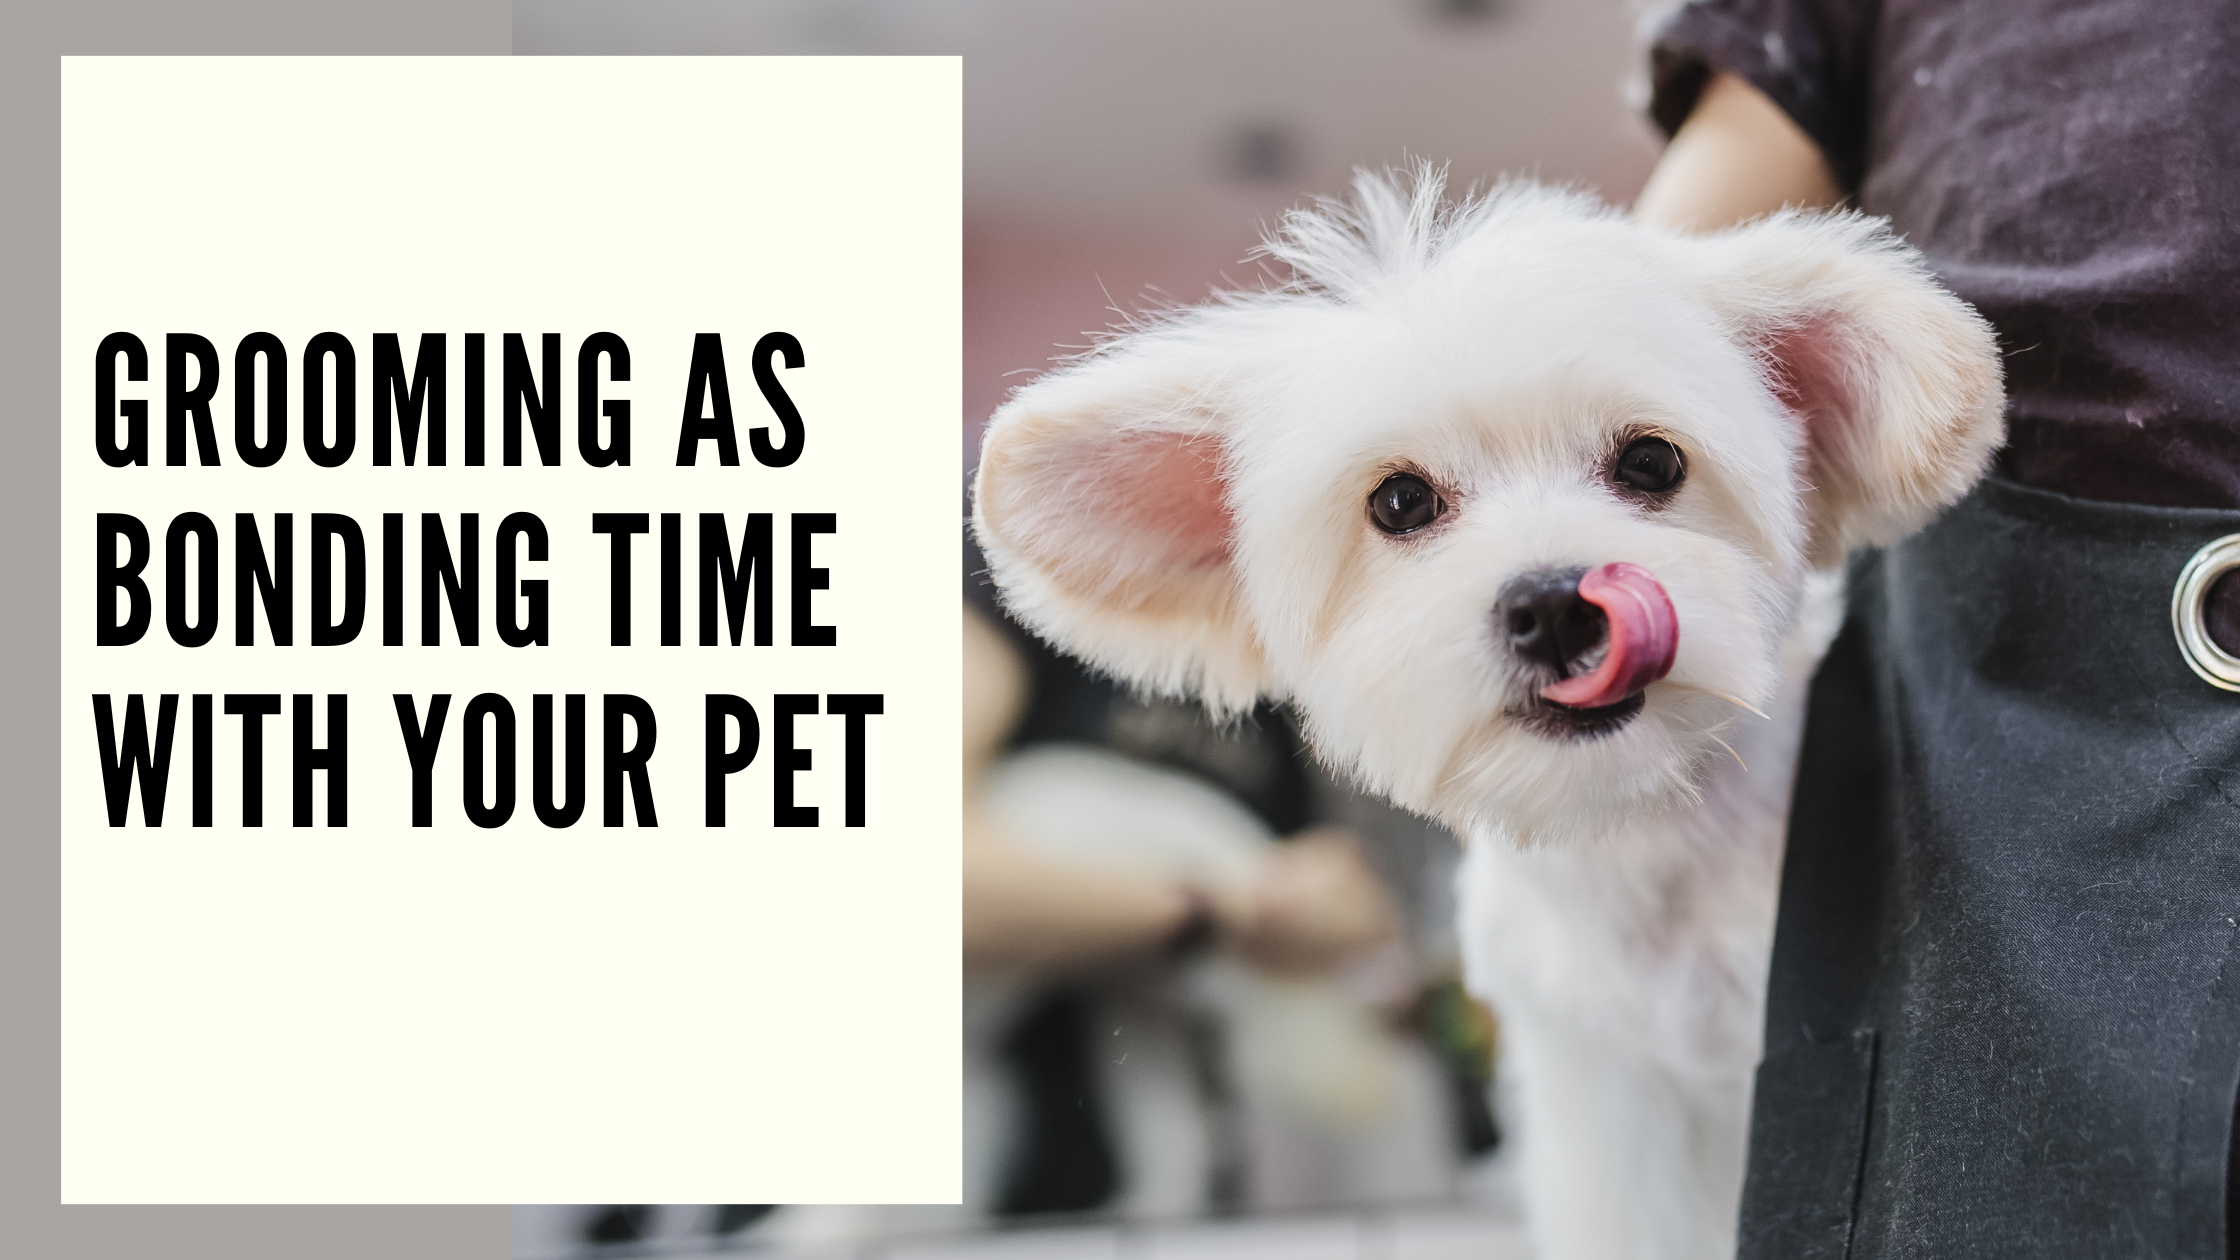 Grooming as Bonding Time with Your Pet